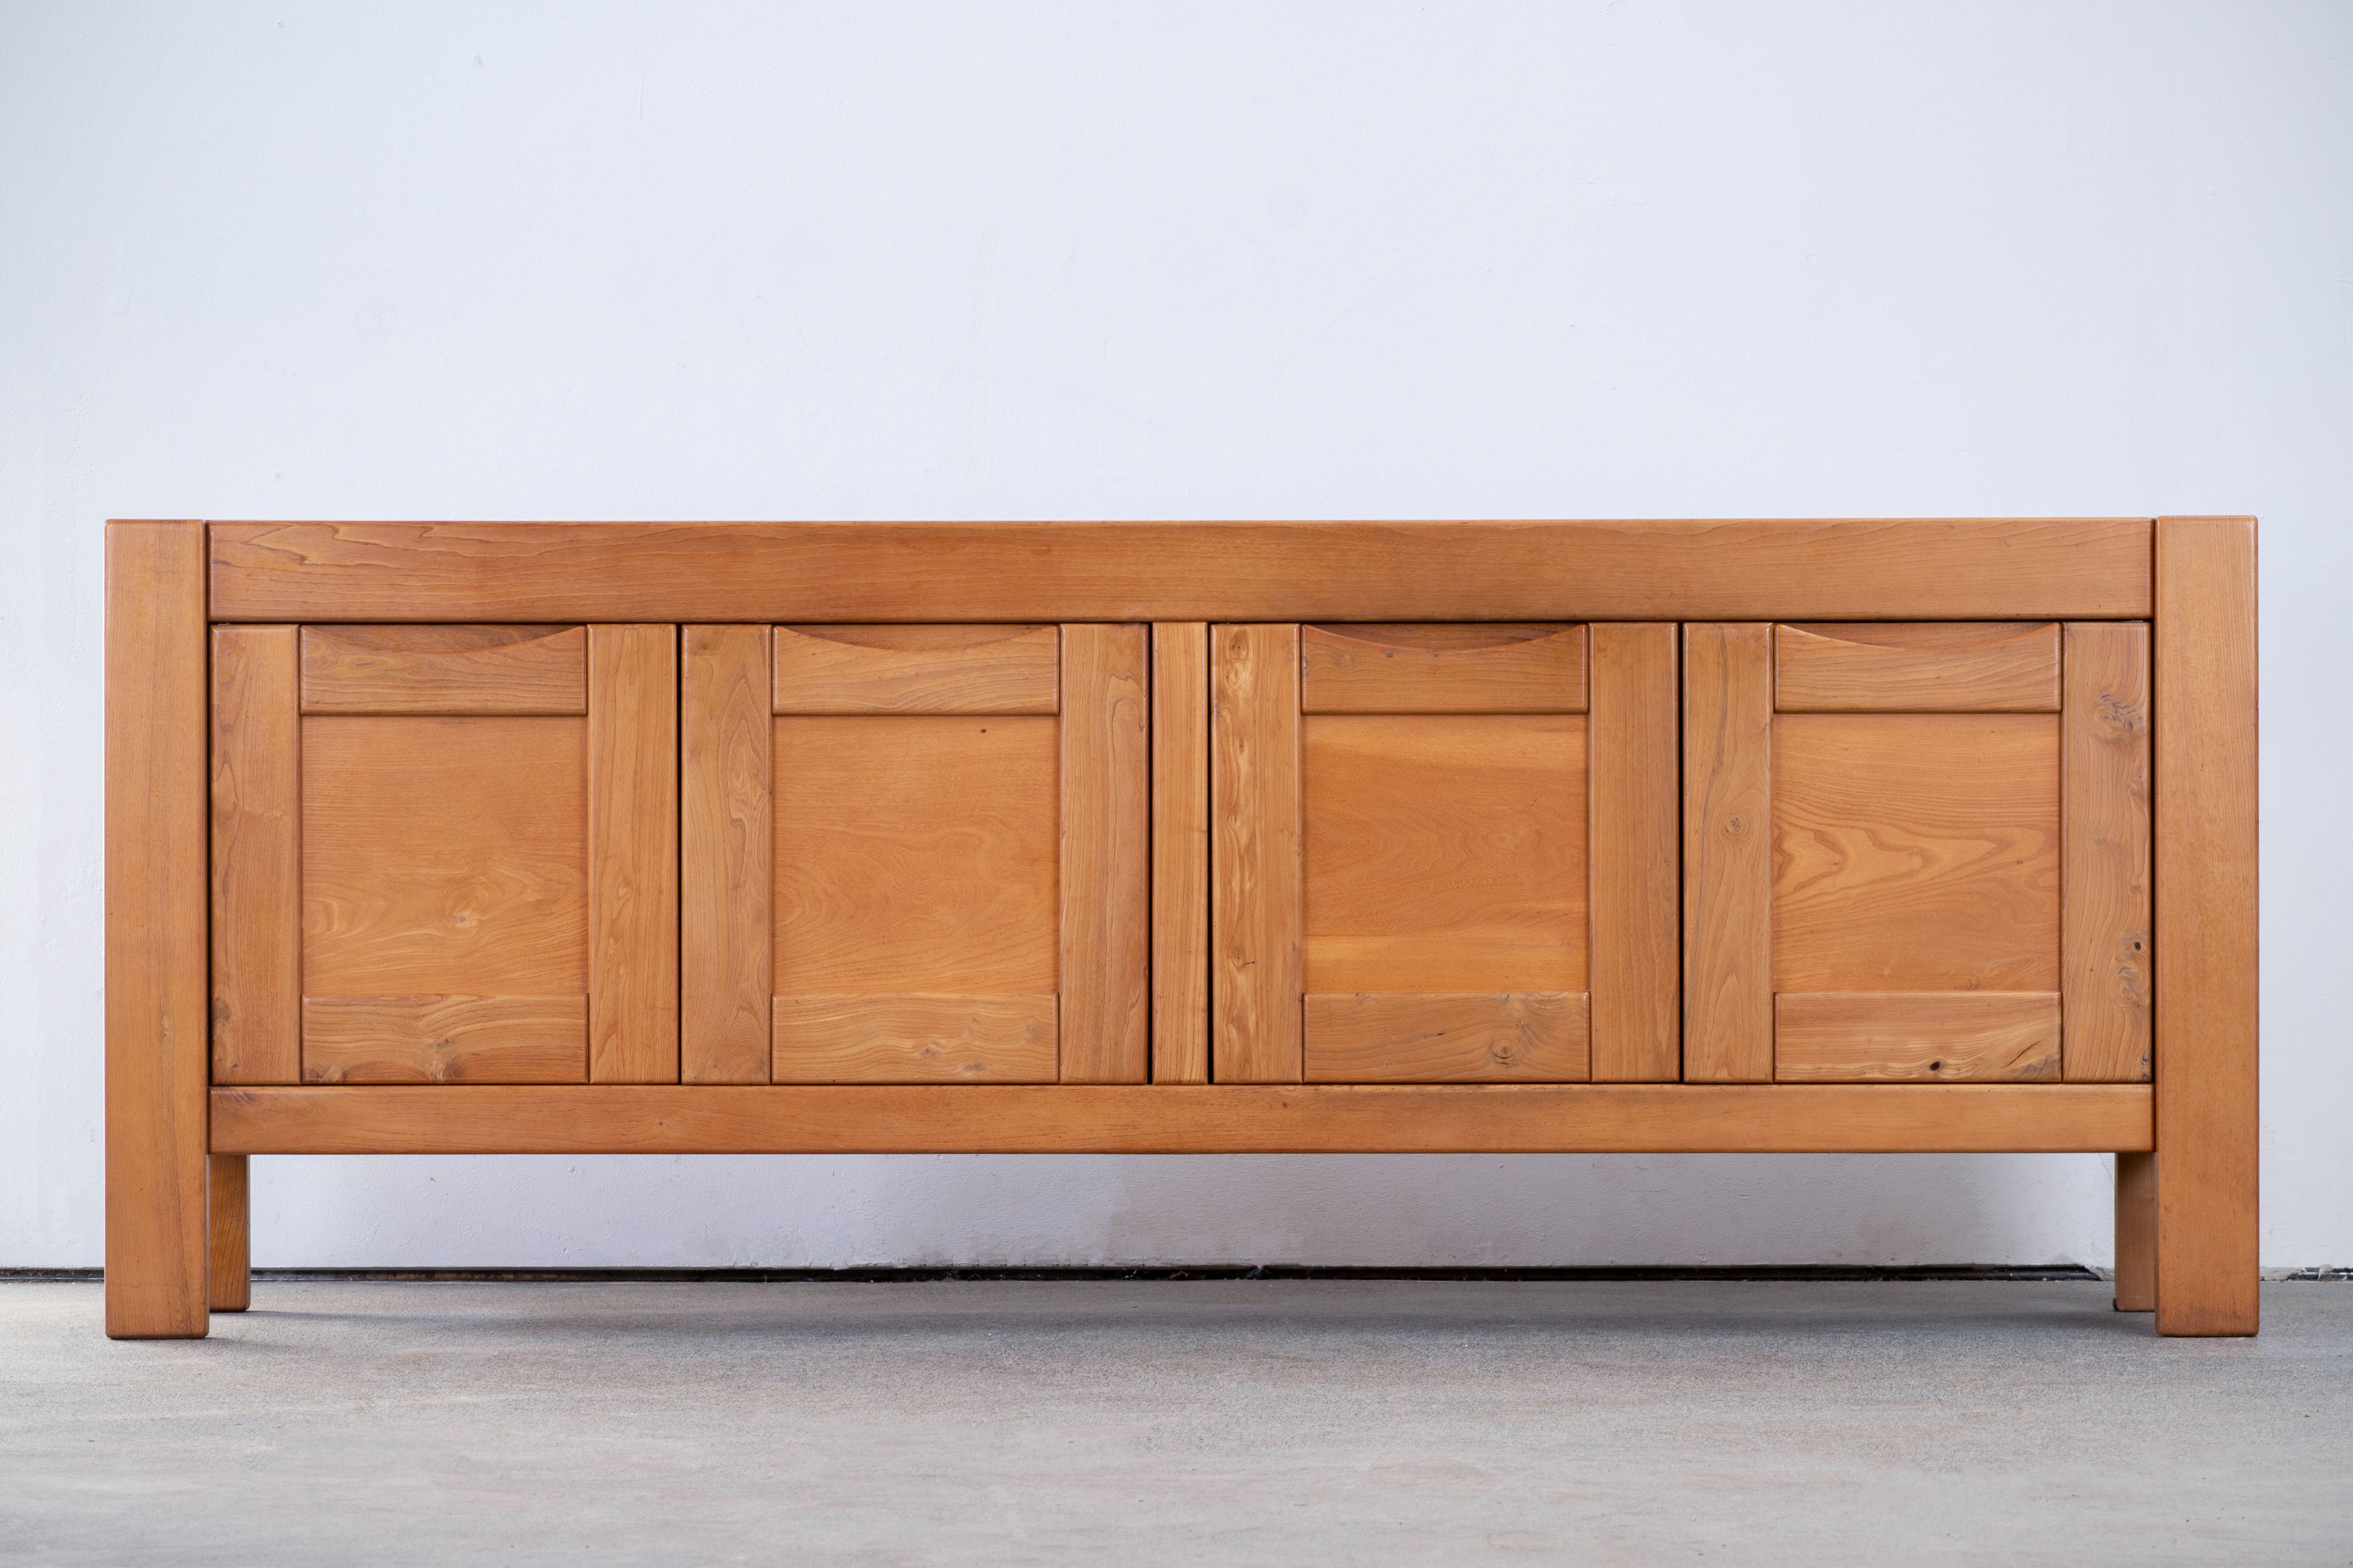 This impressive sideboard is attributed at Maison Regain, France in the late 1970s. The sideboard is made in solid elmwood and has a double door on the left with two beautifully crafted, sculptural handles. A convenient flap style opening and three